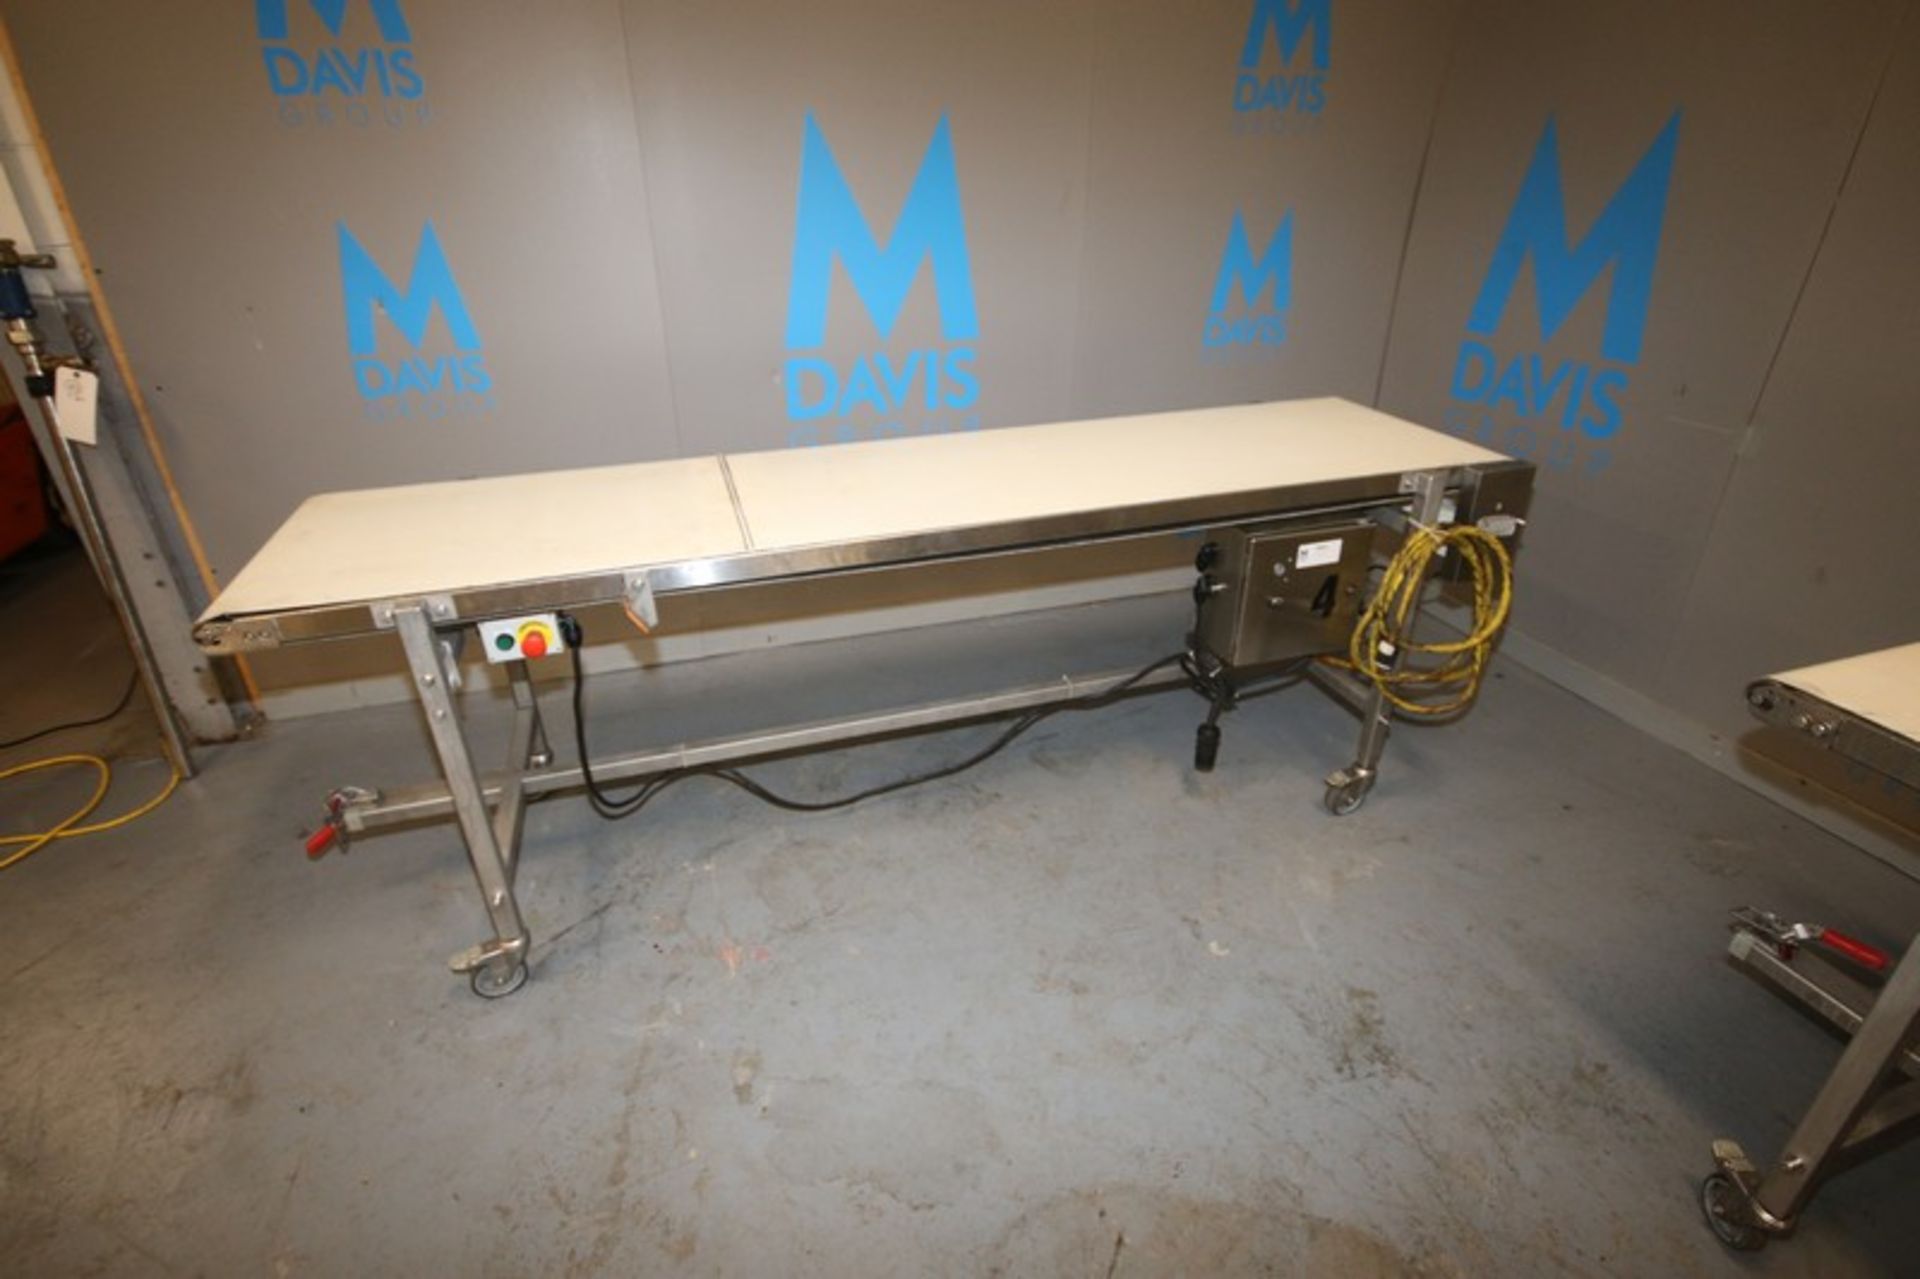 Straight Section of Conveyor,Overall Dims.: Aprox. 8' L x 23-1/4" W Belt, Mounted on S/S Portable